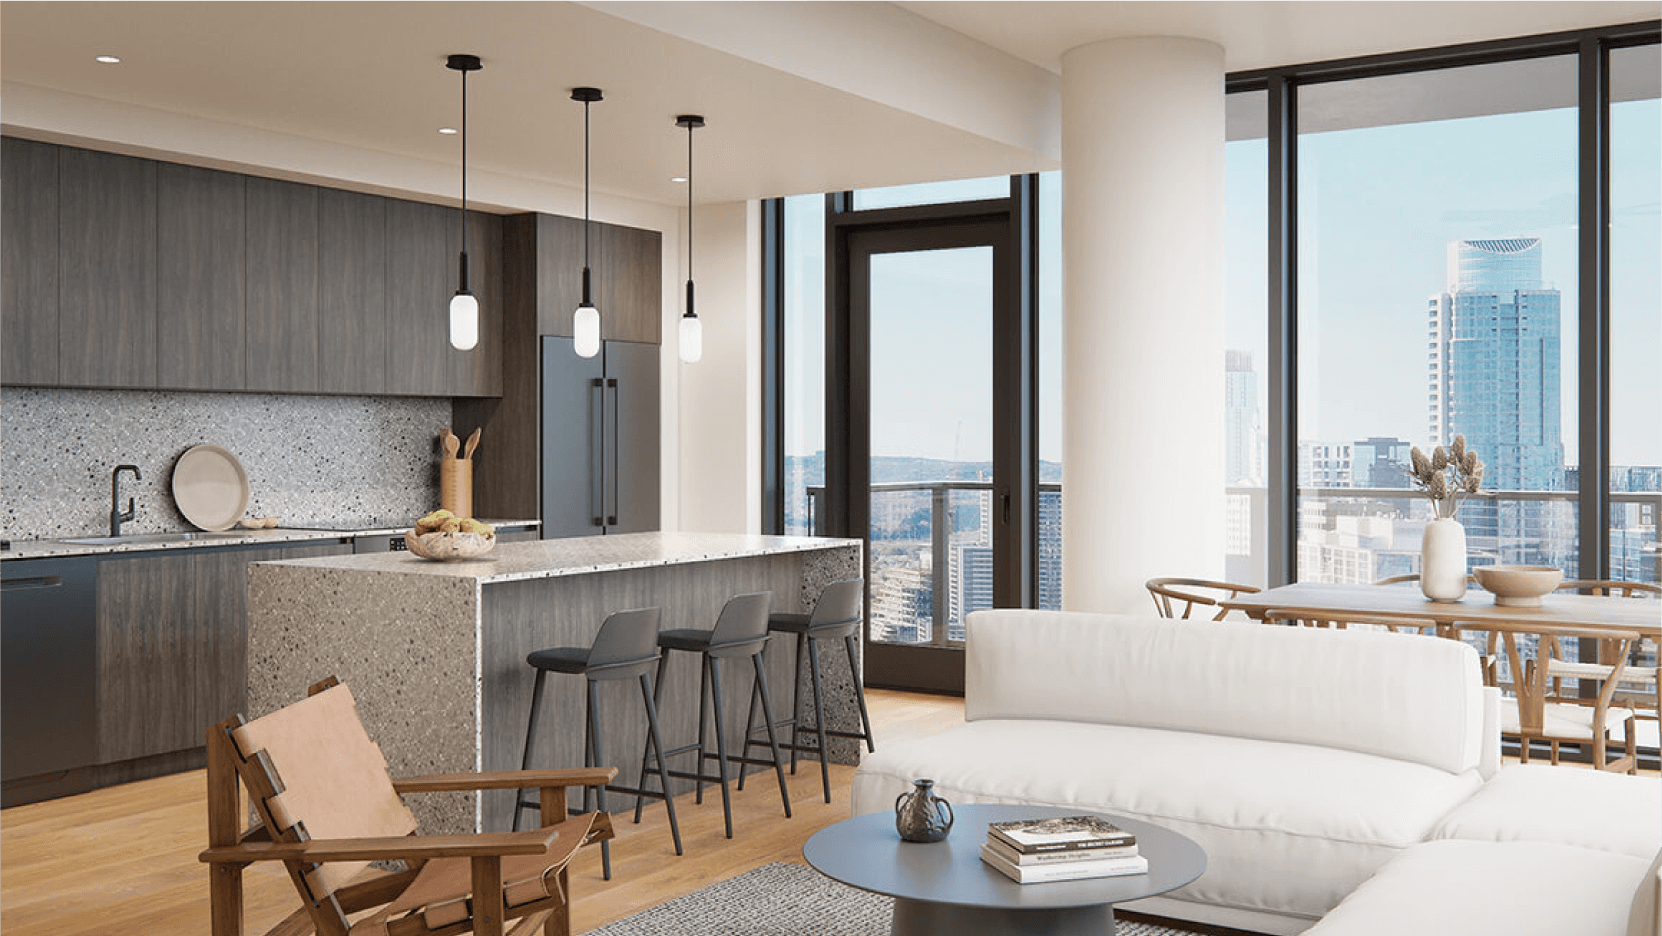 Modern open-plan living room Vesper ATX condos in downtown Austin with plush white sofas, a wooden center table, and an adjoining dining area, all bathed in natural light from the floor-to-ceiling windows.